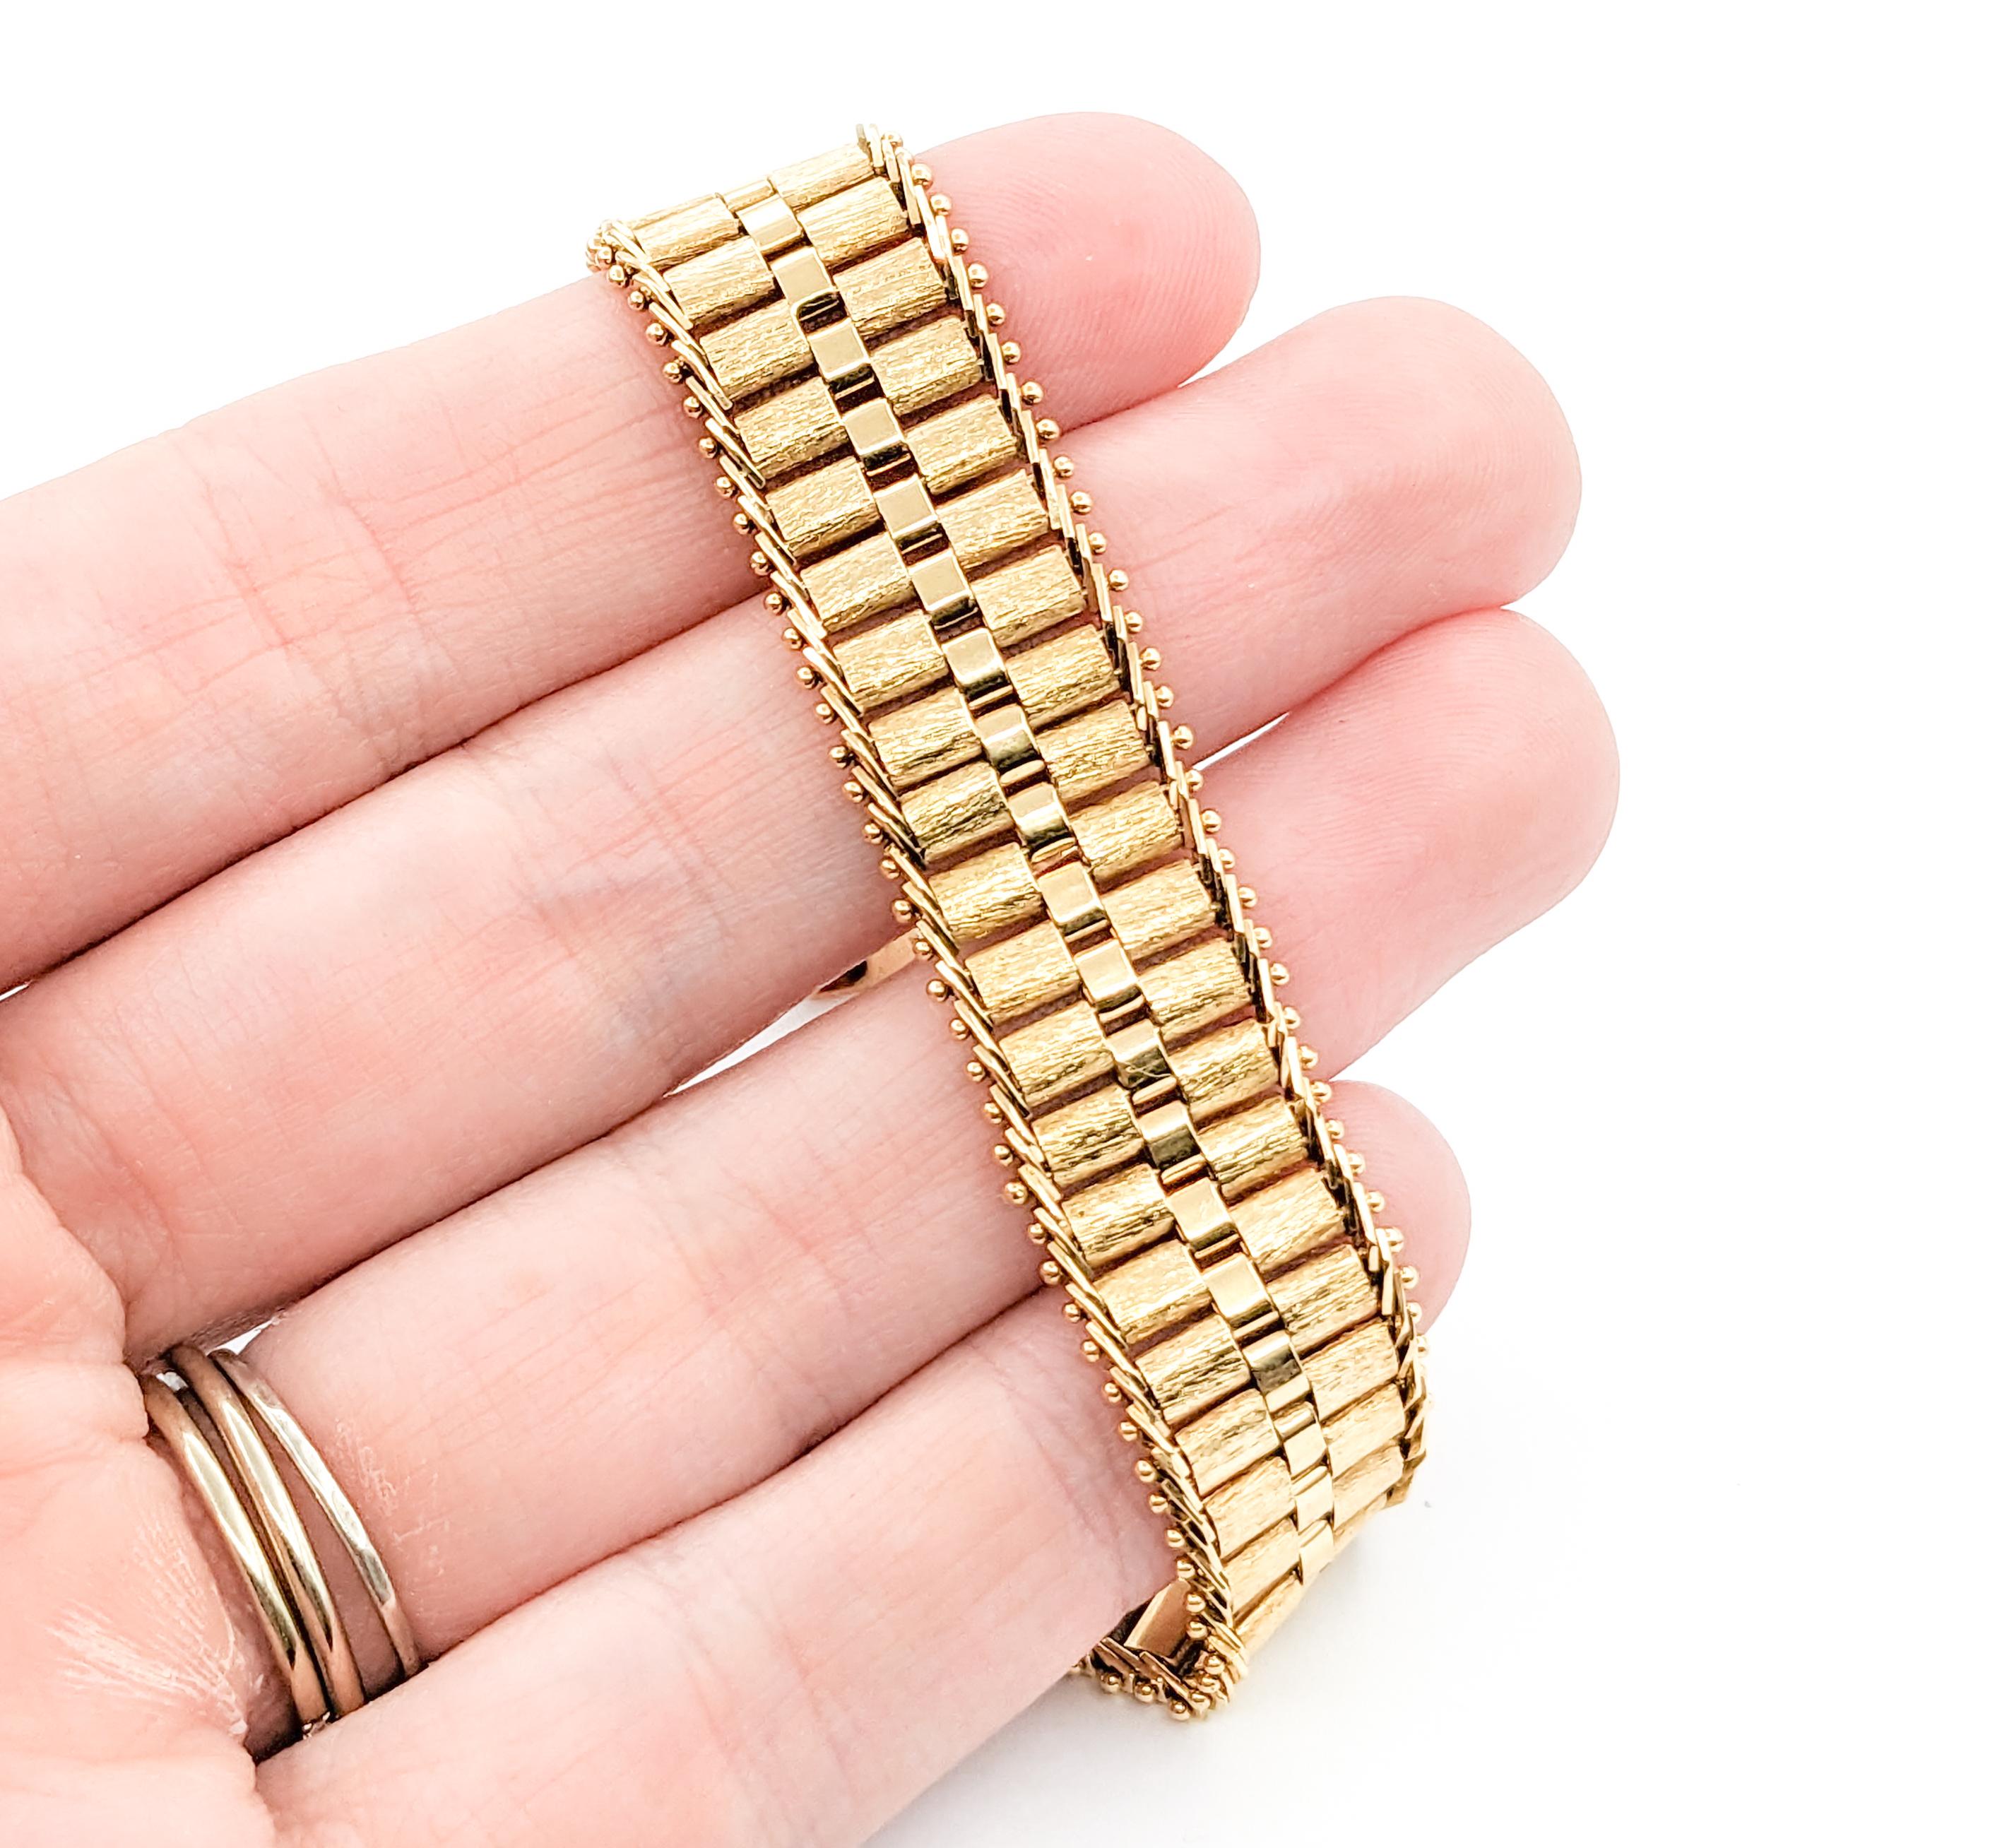 Rolex Link Design Bracelet In Yellow Gold In Excellent Condition For Sale In Bloomington, MN